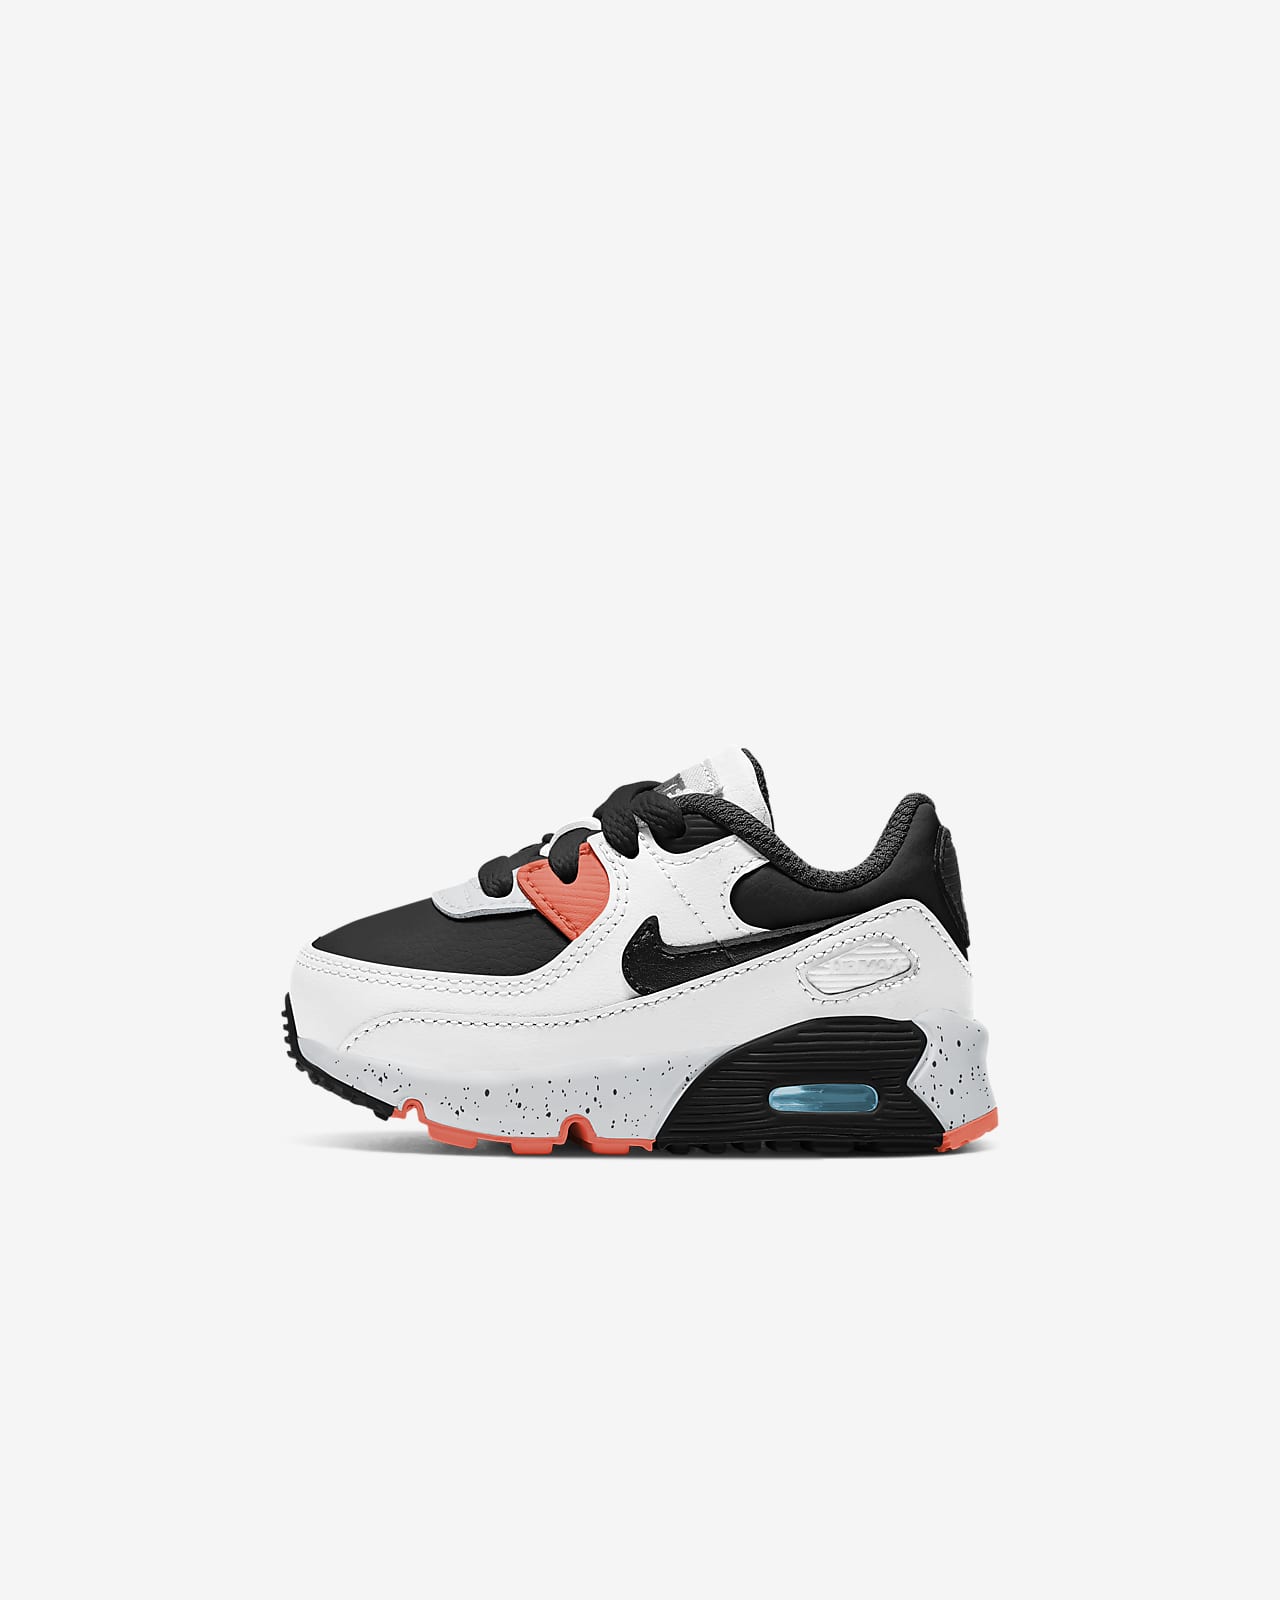 Nike Air Max 90 Baby/Toddler Shoes